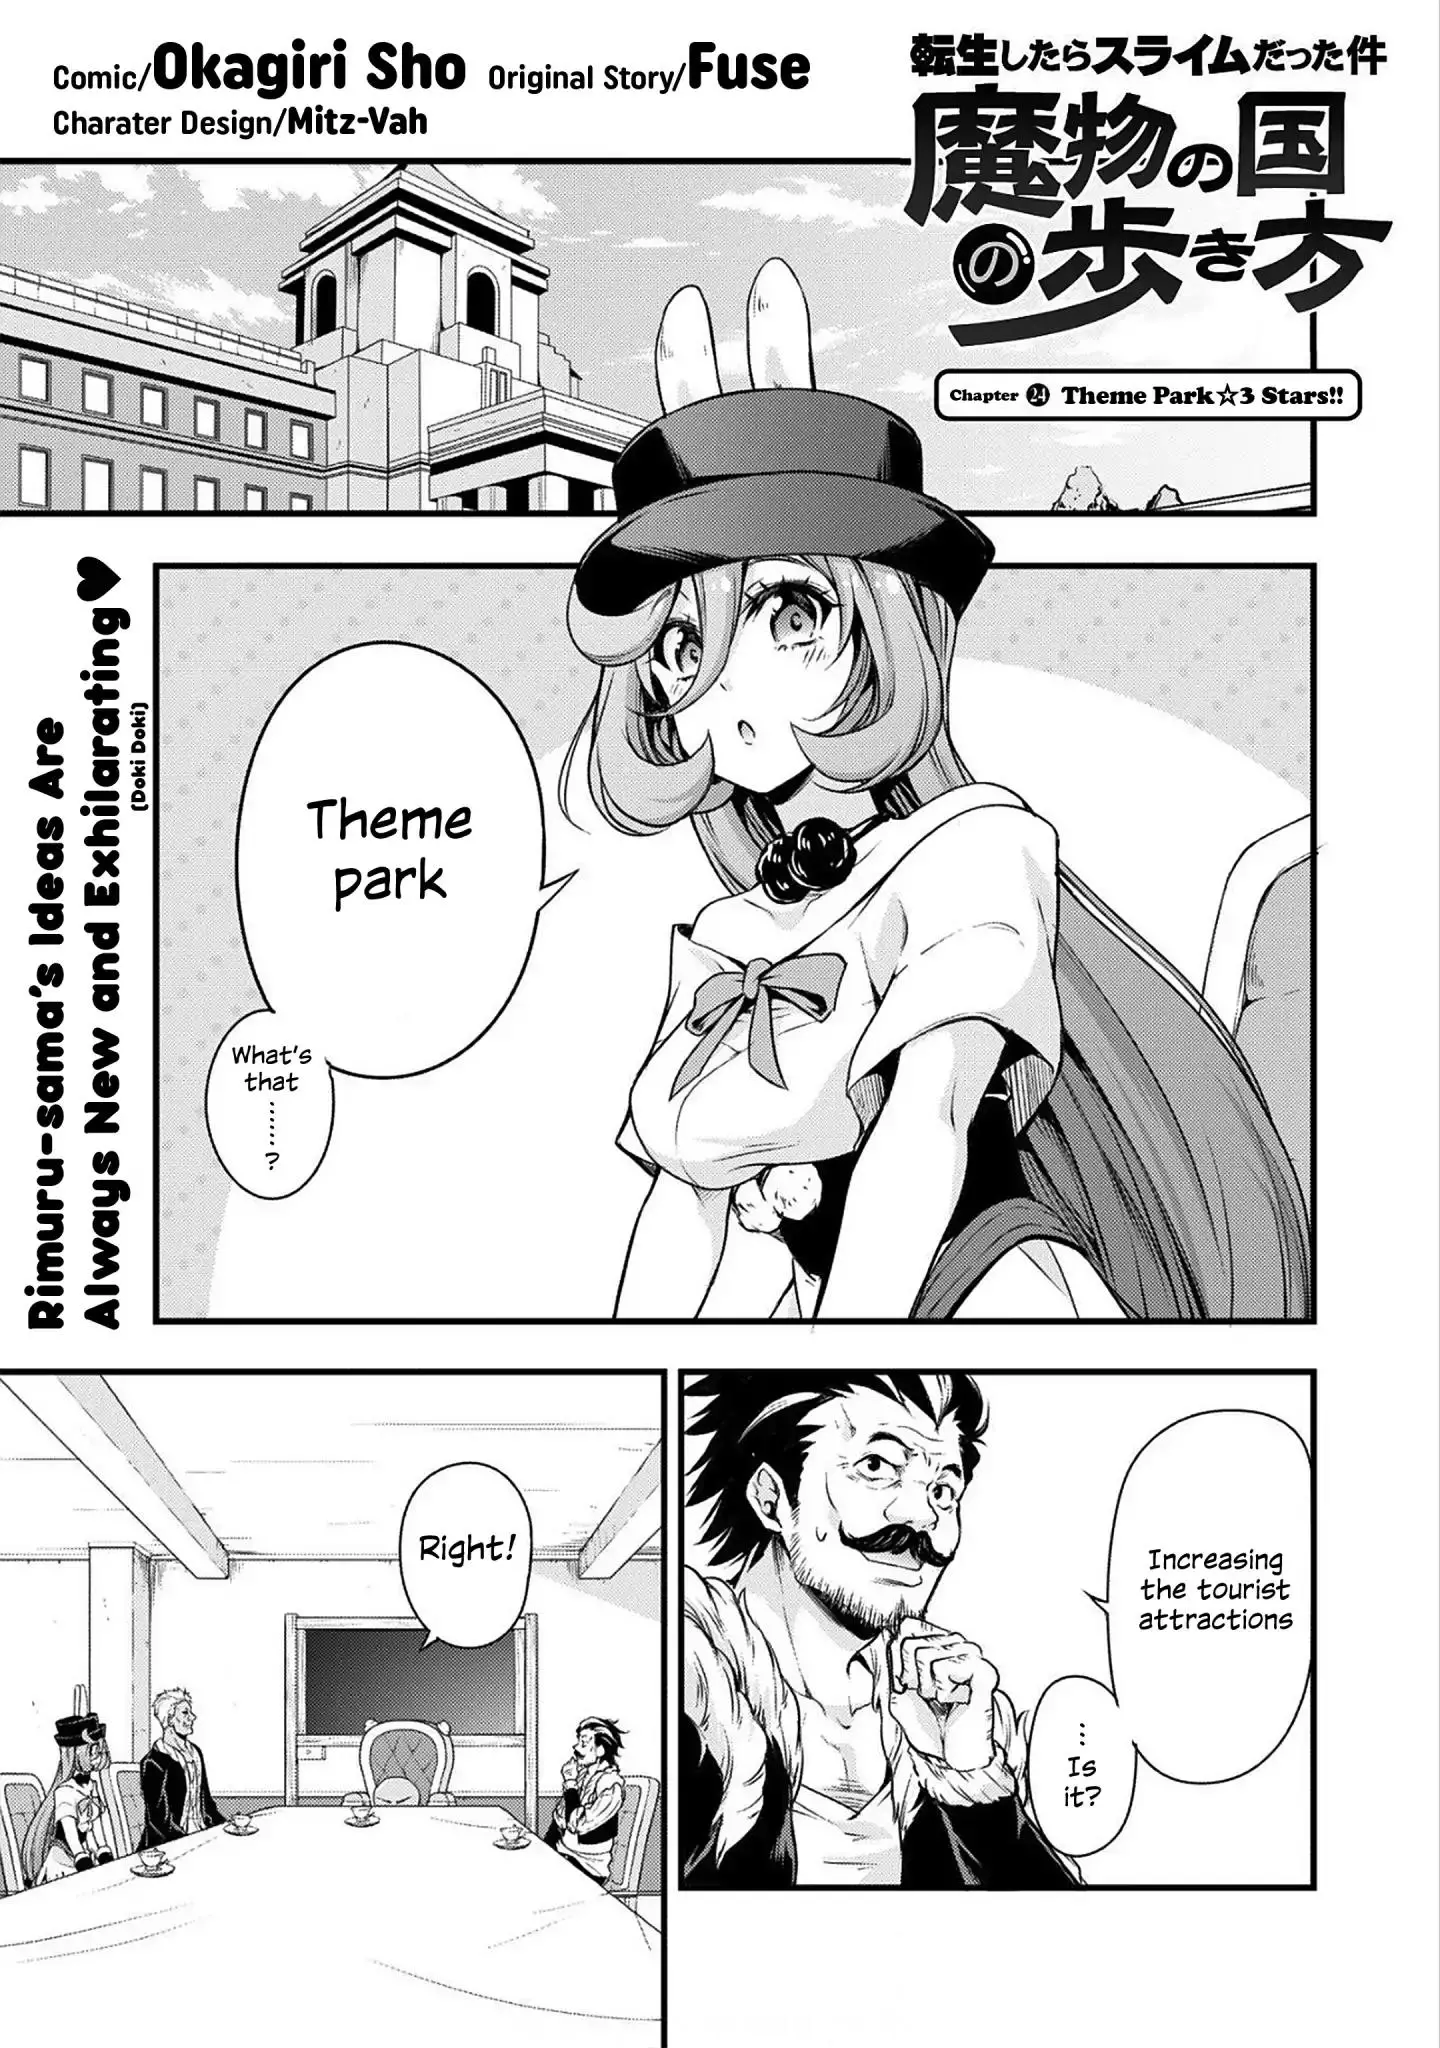 Tensei Shitara Slime Datta Ken: The Ways of Strolling in the Demon Country - 24 page 0